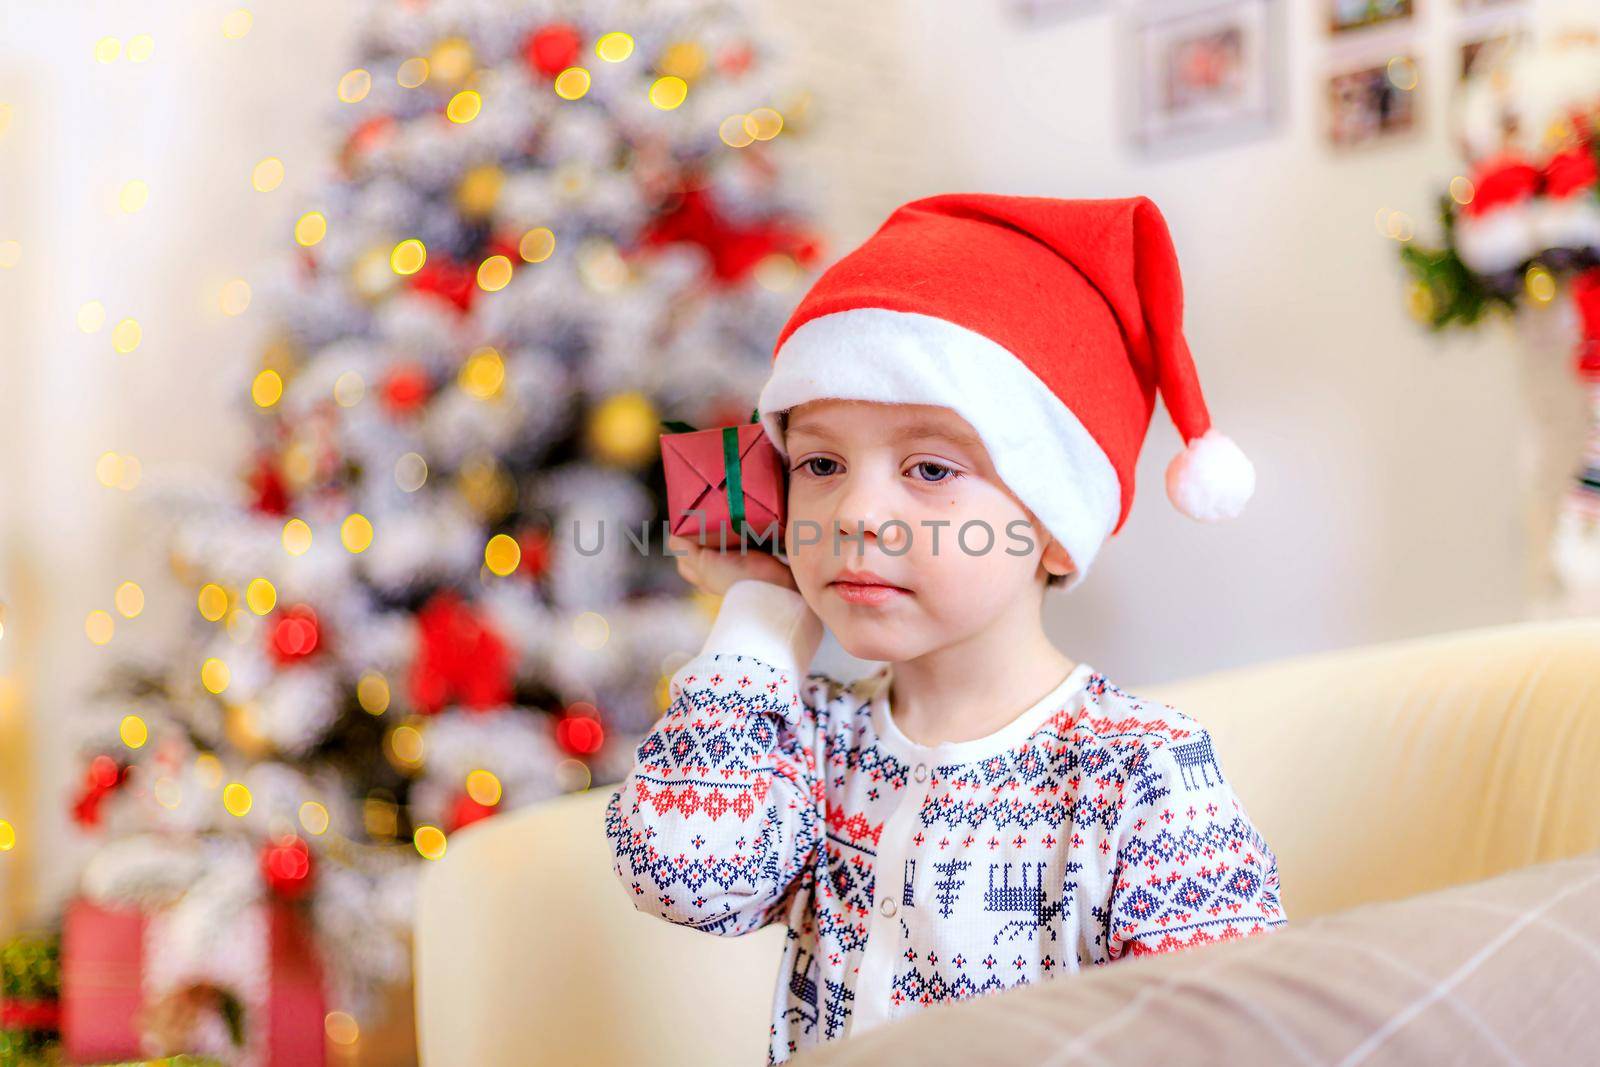 Boy at the Christmas tree. The boy folded his hands.. Cute baby . Holiday. Article about new year and Christmas. Colorful spruce. Garland. Holiday decoration and decor . Santa hat.